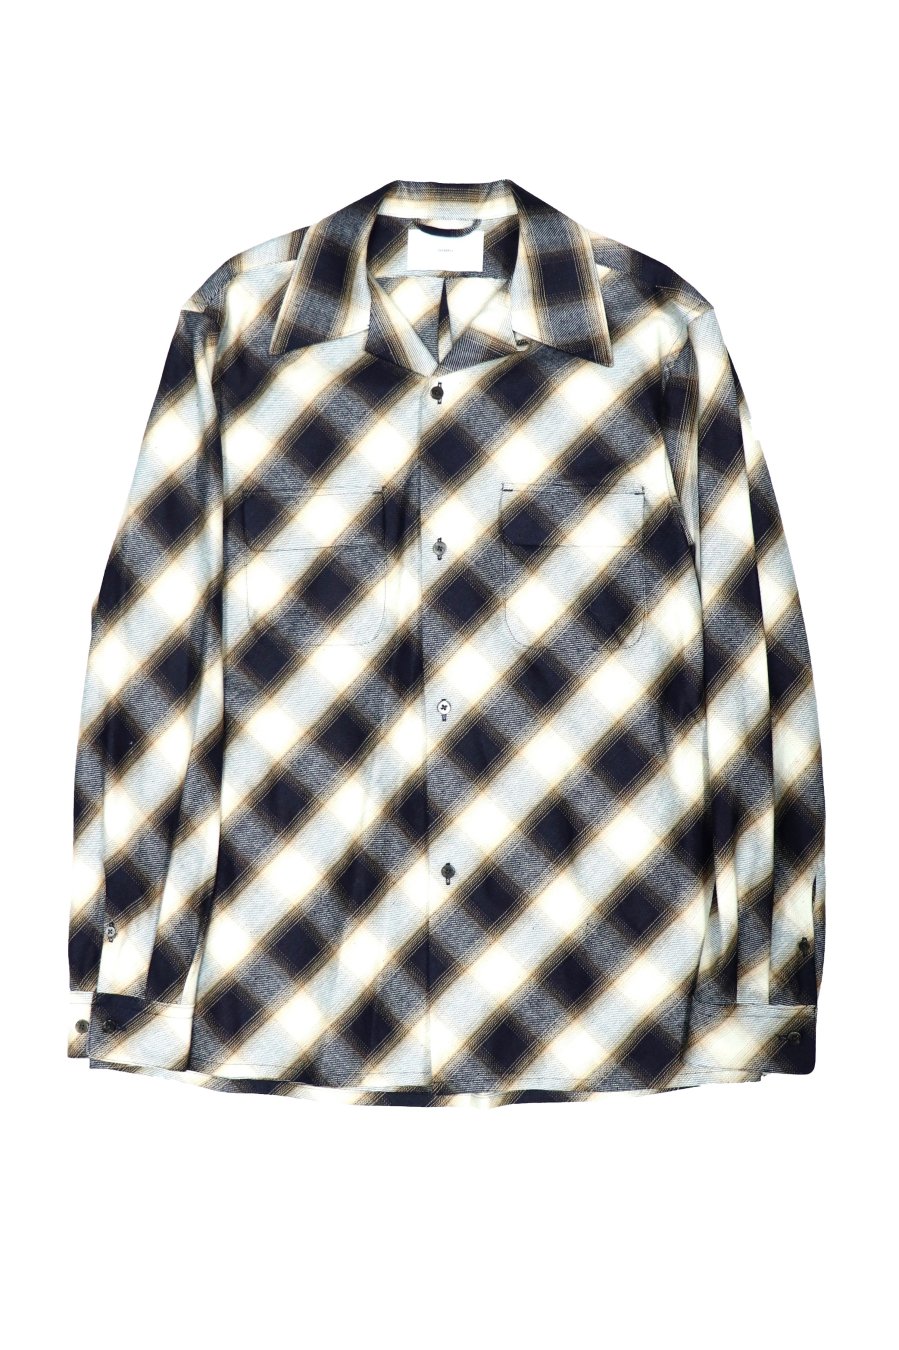 SUGARHILL  INDIGO COTTON OMBRE PLAID OPEN COLLAR BLOUSE<img class='new_mark_img2' src='https://img.shop-pro.jp/img/new/icons15.gif' style='border:none;display:inline;margin:0px;padding:0px;width:auto;' />